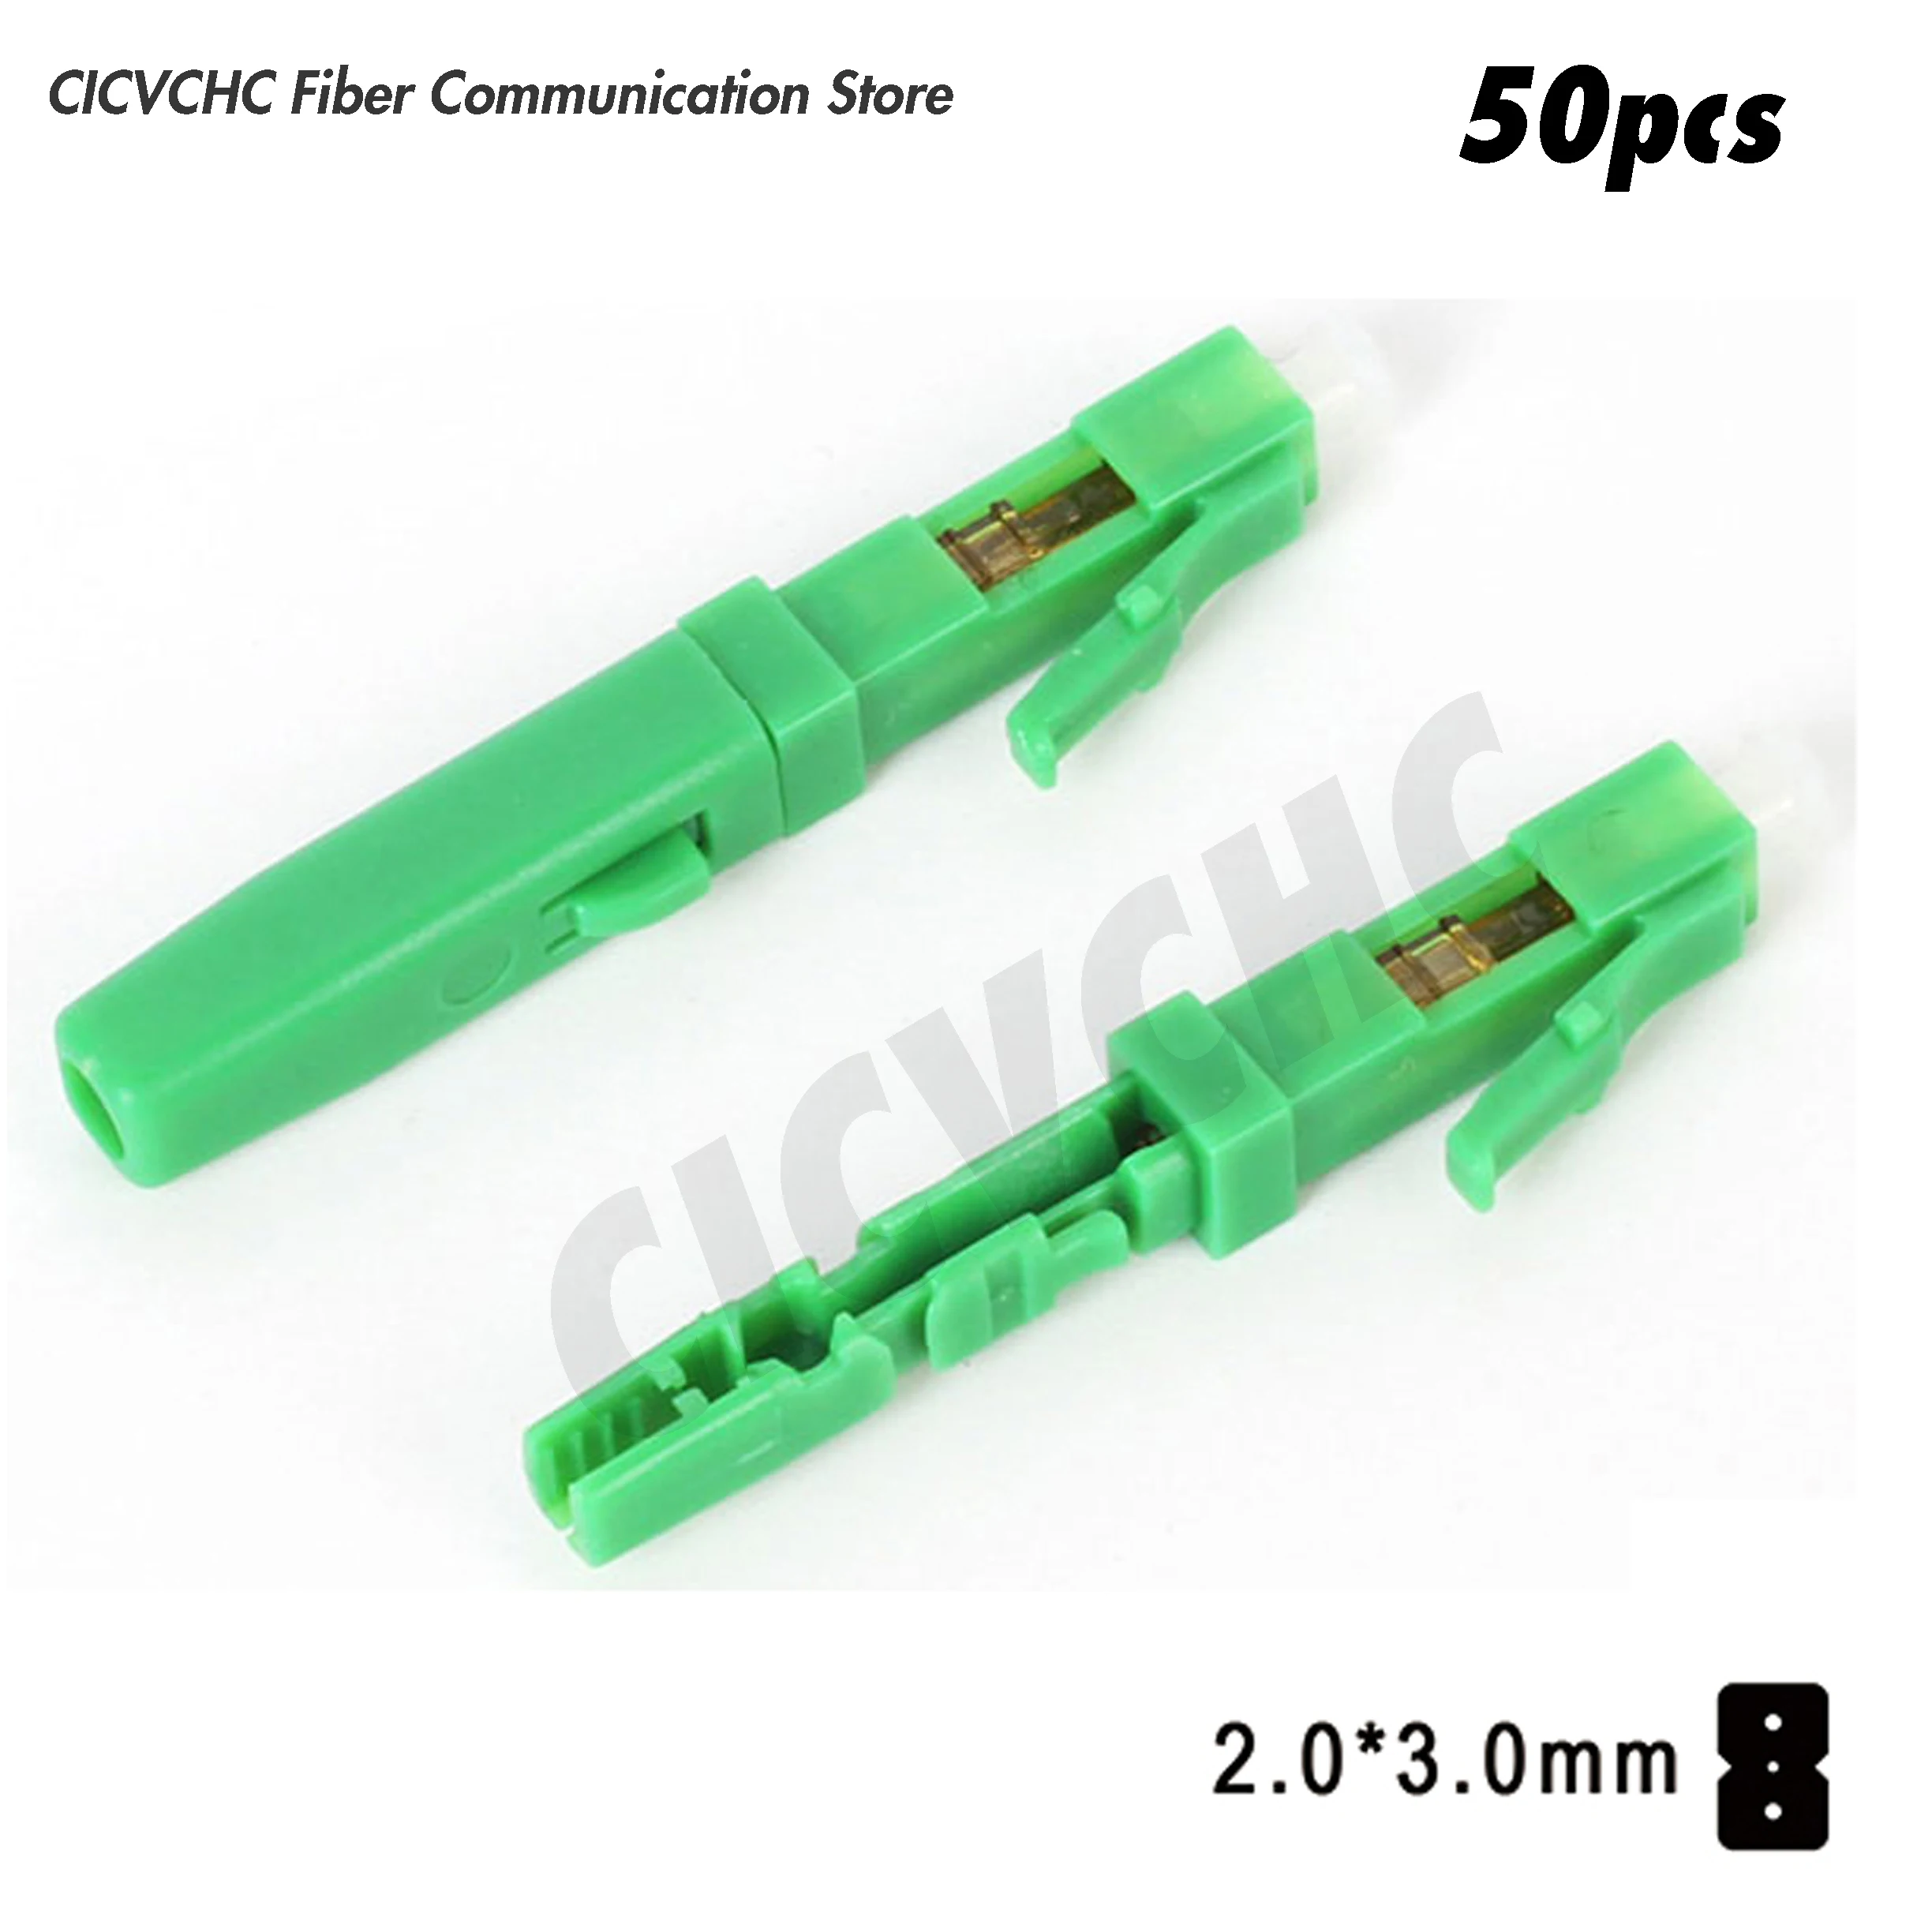 50pcs or 5pcs LC/APC Field Installation Connector Fast Connector for 2.0x3.0mm Drop Cable